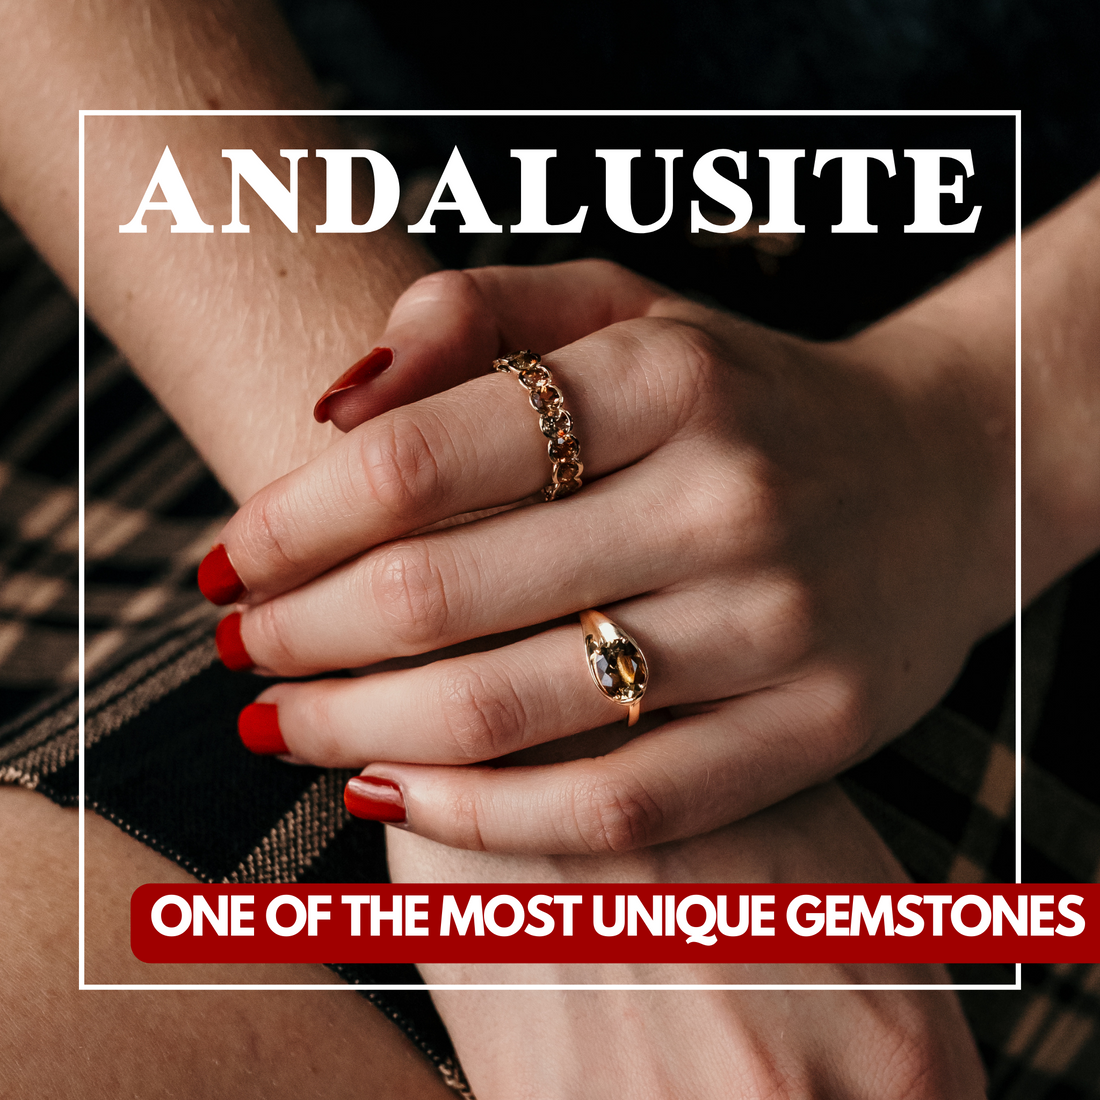 Andalusite Stone Buyers Guide: Prices & Qualities